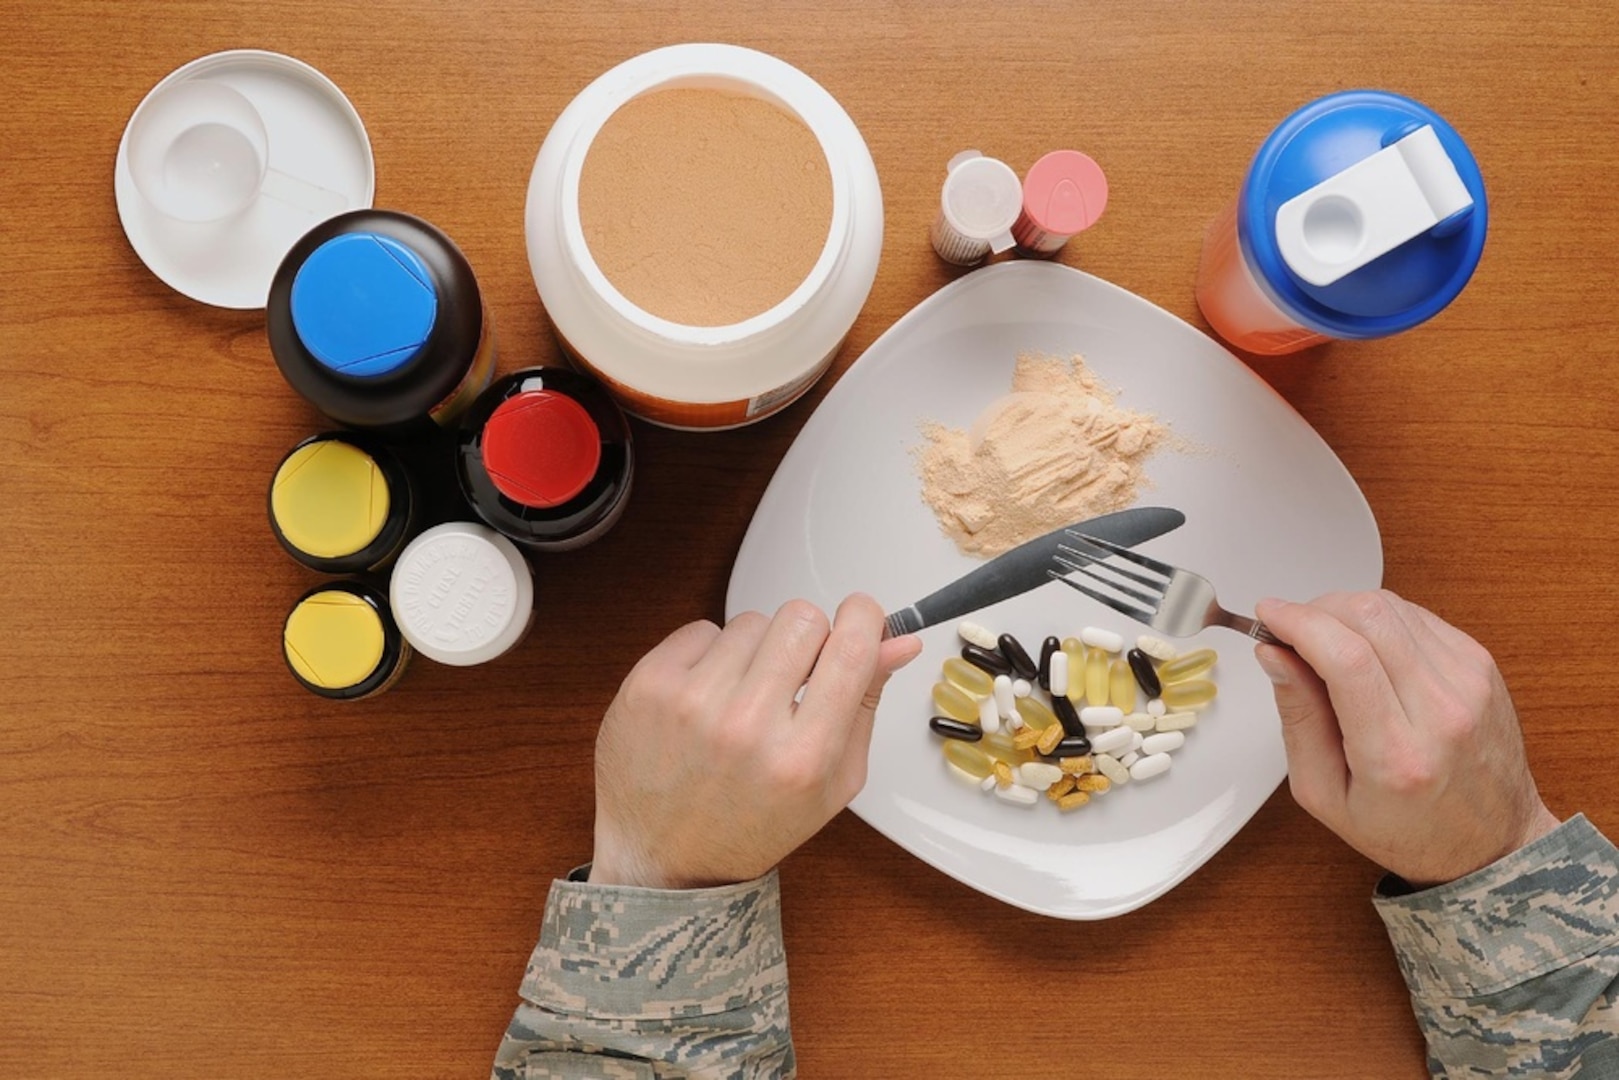 The supplement business is a multi-billion dollar industry that is not currently regulated like conventional food and drug products by the Food and Drug Administration. The use of supplements is designed to add further nutritional value to the diet, not act as a meal replacement. (U.S. Air Force photo illustration/Airman 1st Class Daniel Brosam)